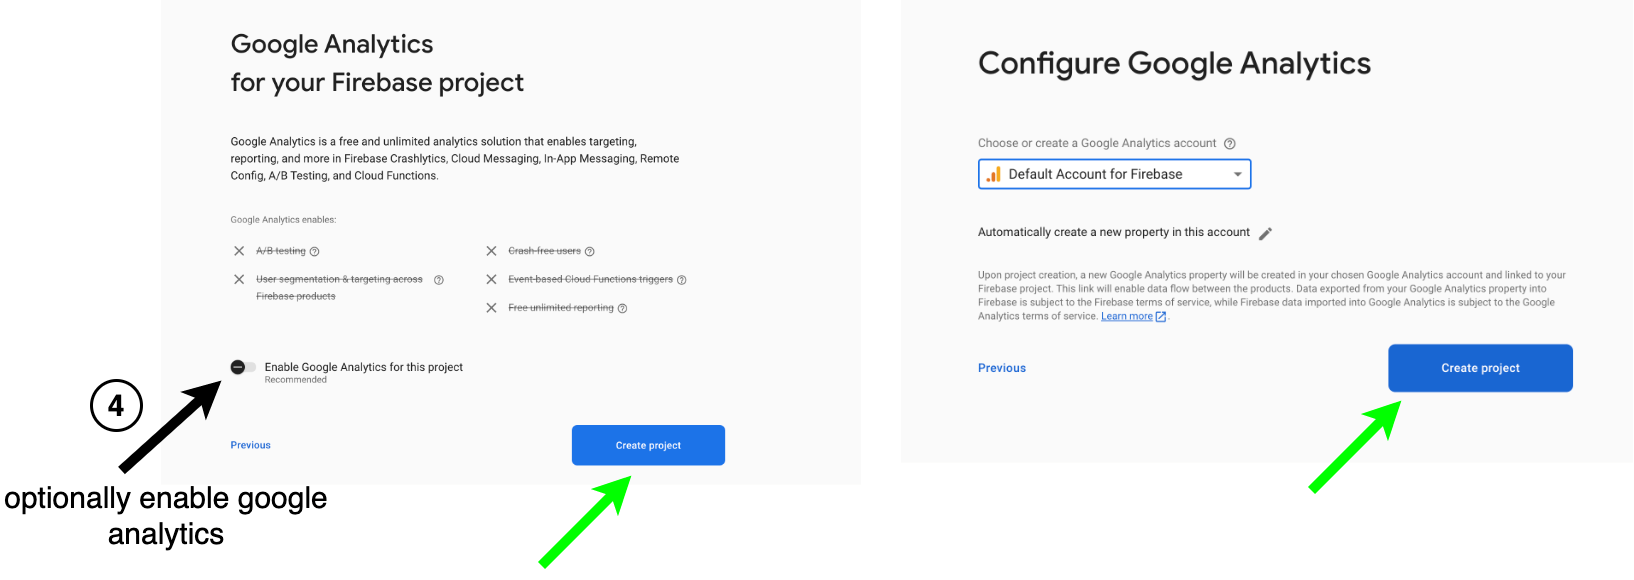 Google Analytics for your Firebase project - optionally enable. Configure Google Analytics screen dropdown shows Default Account for Firebase.